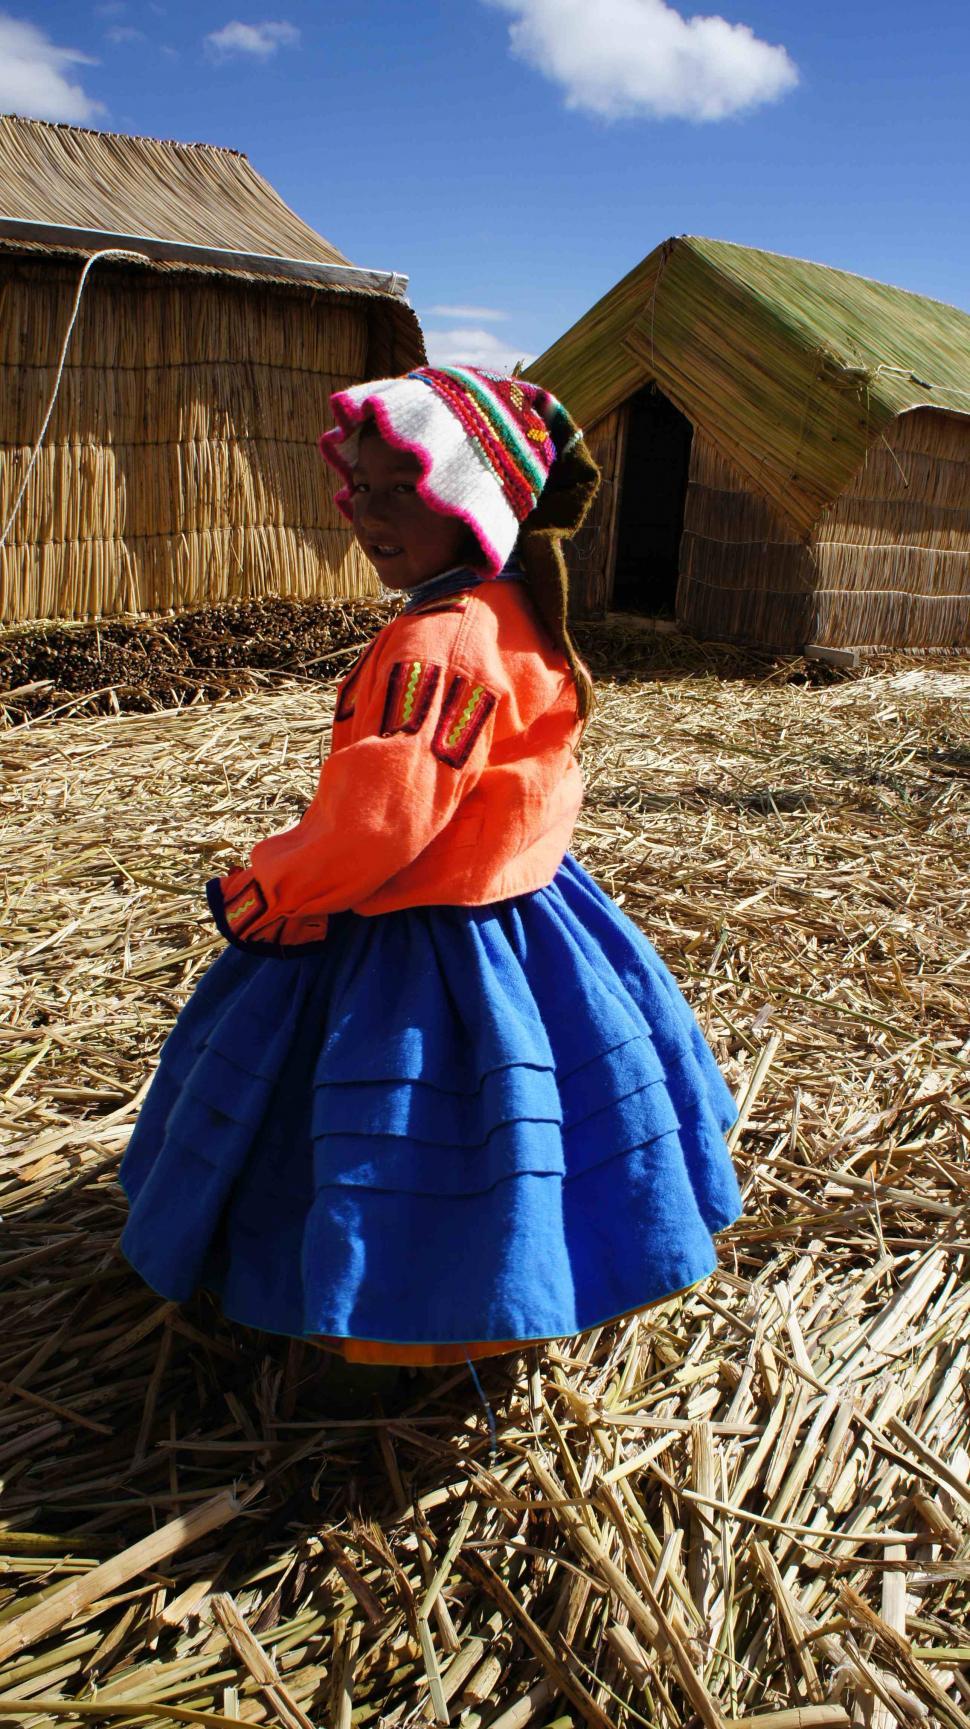 Free Image of Lake Titicaca Buildings and Families 